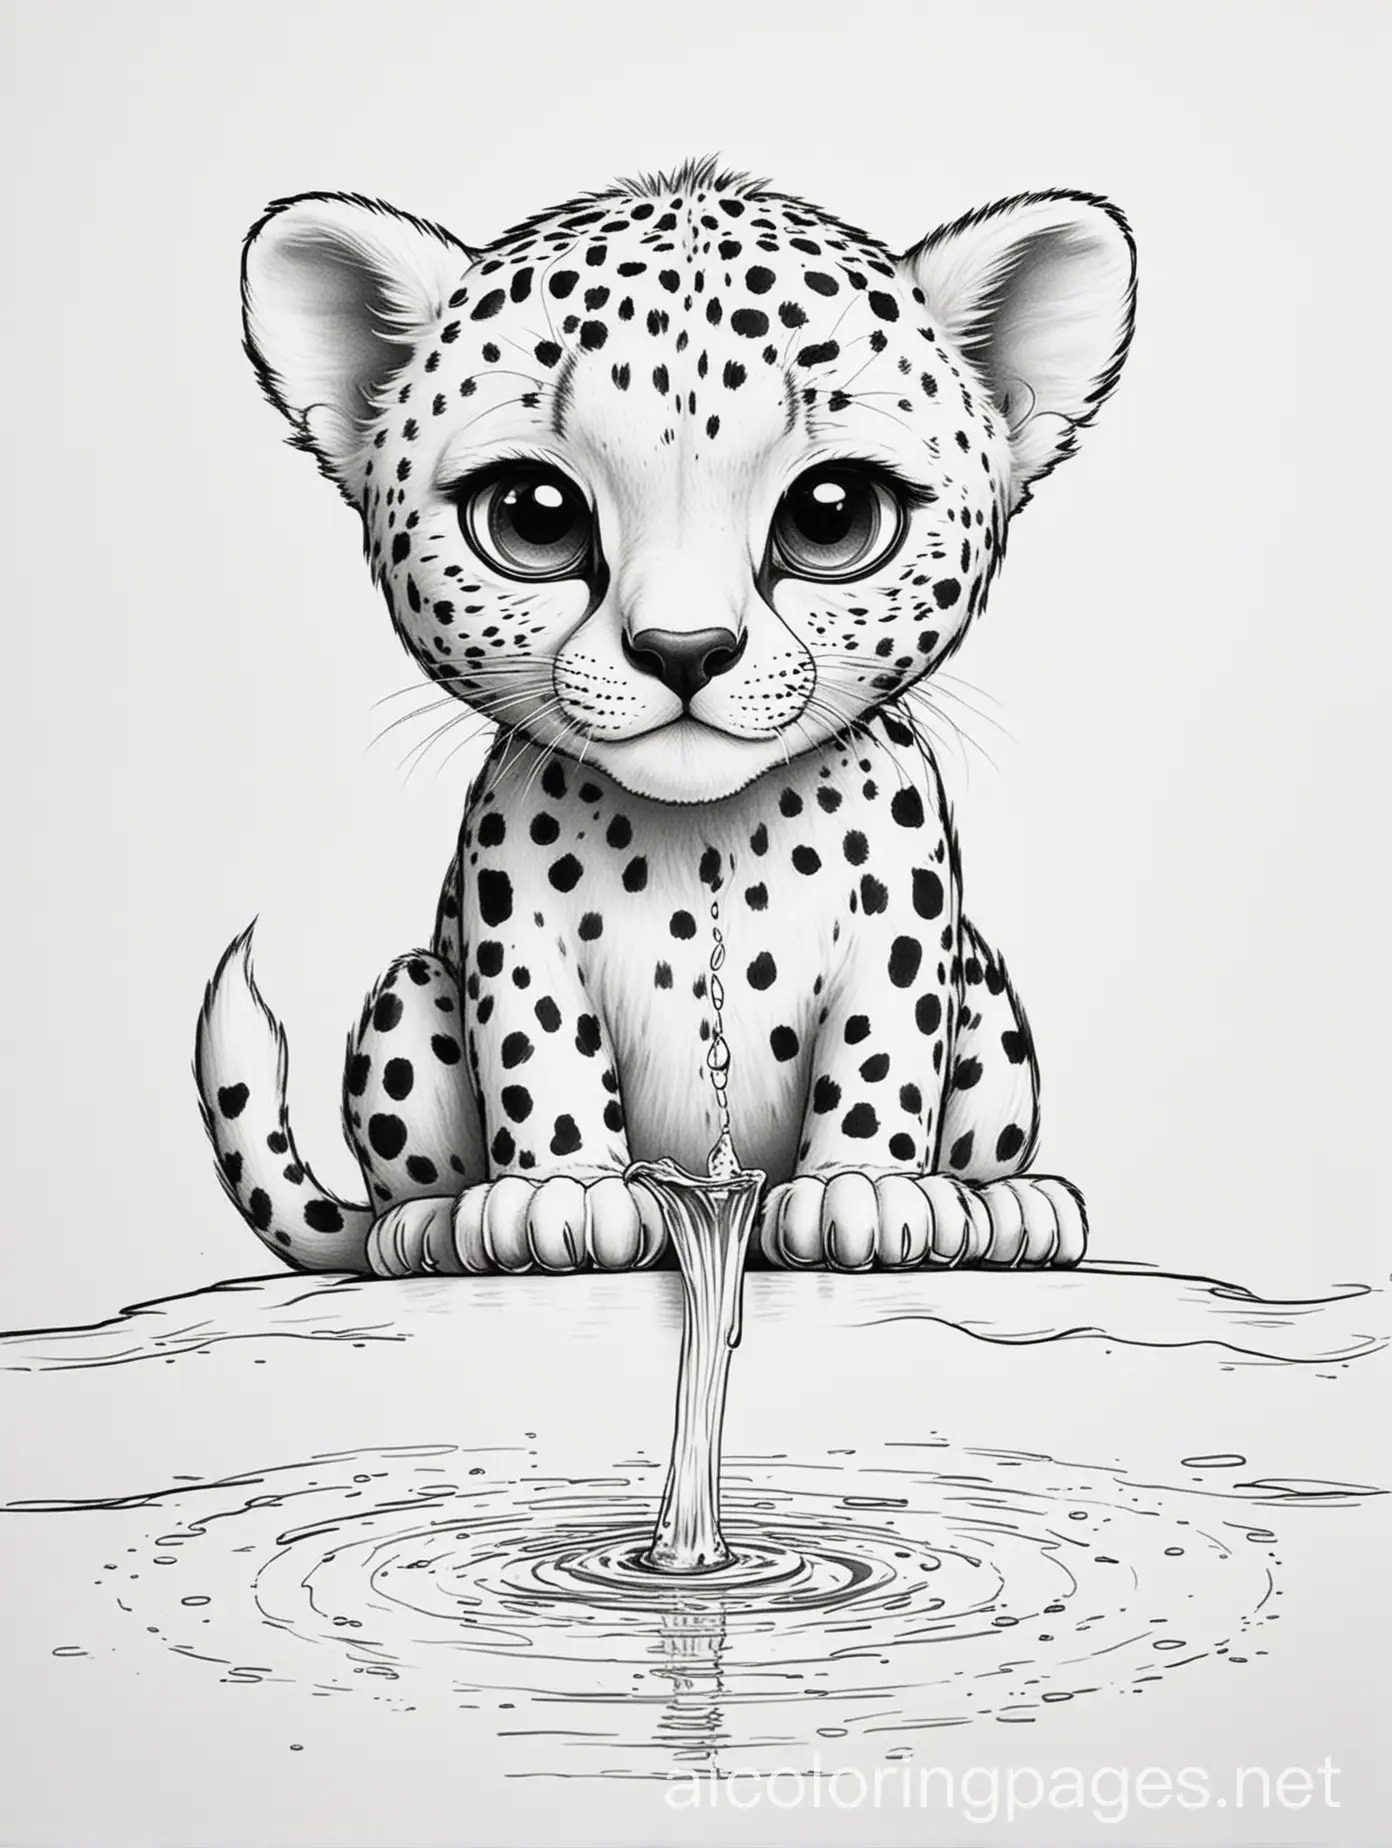 cute cheetah drinking water, Coloring Page, black and white, line art, pure white background, Simplicity, Ample White Space. , Coloring Page, black and white, line art, white background, Simplicity, Ample White Space. The background of the coloring page is plain white to make it easy for young children to color within the lines. The outlines of all the subjects are easy to distinguish, making it simple for kids to color without too much difficulty